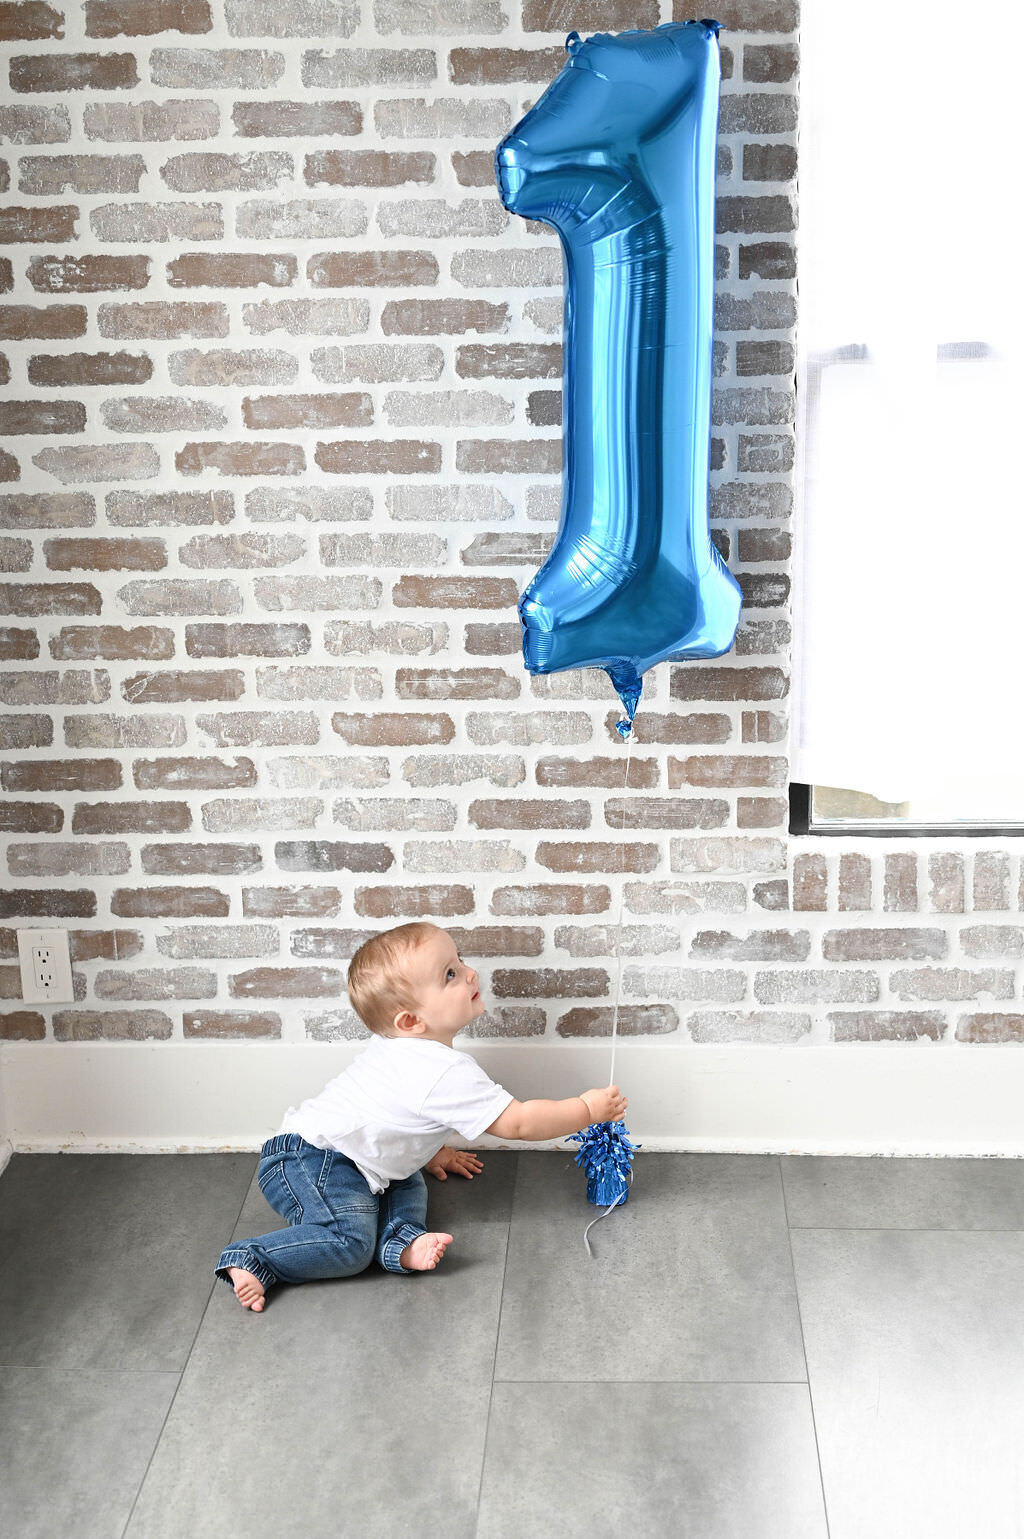 A small child on the ground playing with a one shaped balloon.